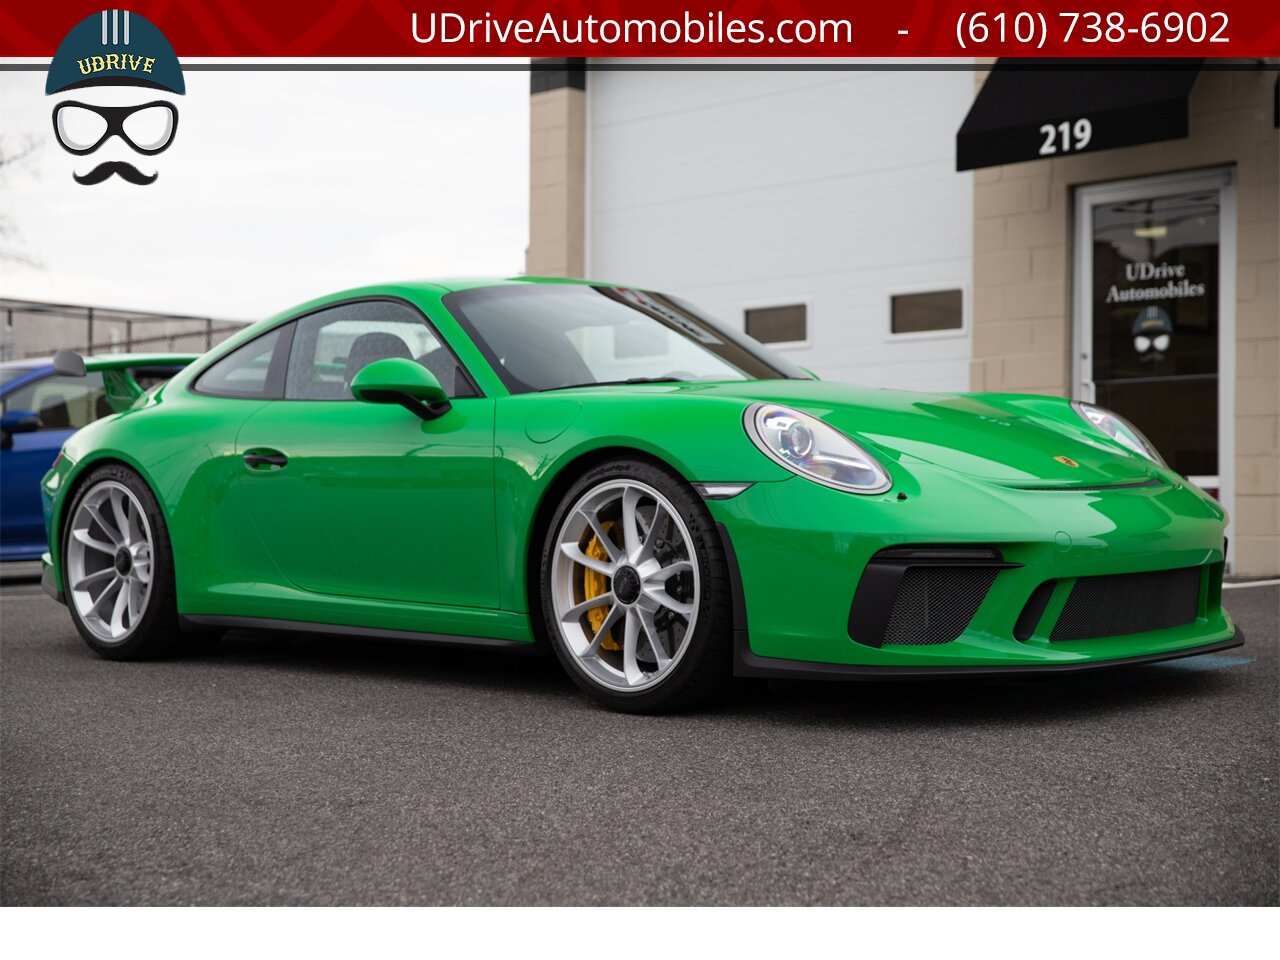 2018 Porsche 911 GT3 6 Speed Paint To Sample Viper Green 48 Miles  Front Axle Lift PCCB Carbon Bucket Seats - Photo 14 - West Chester, PA 19382